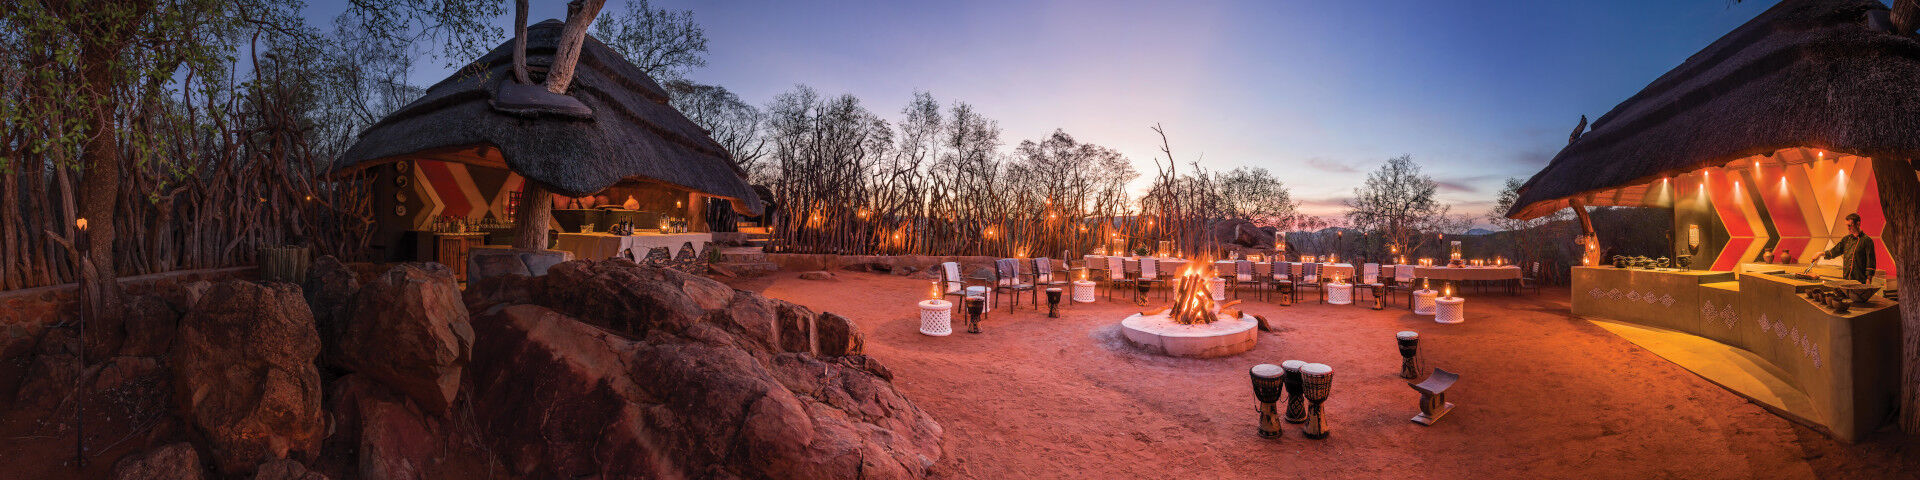 Accommodation in Madikwe Game Reserve South Africa